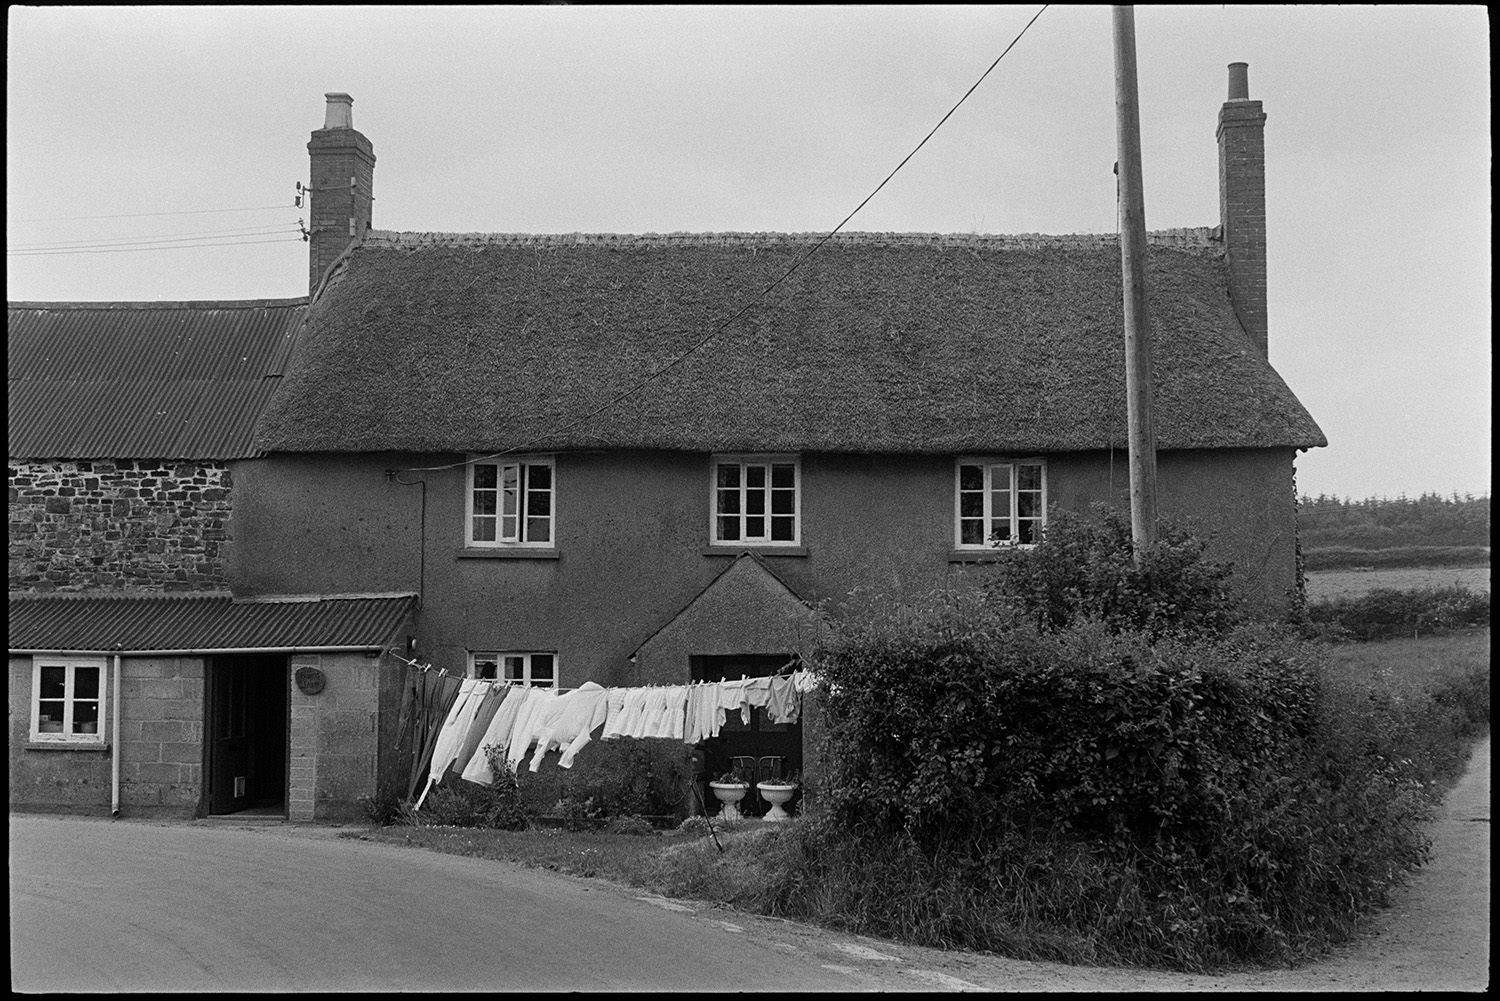 Cob and thatch farmhouse with clothes on washing line.
[Washing drying on a line at the front of Bonds, a cob and thatch farmhouse on a road junction at Chulmleigh. A stone barn with a corrugated iron roof is attached to the farmhouse.]